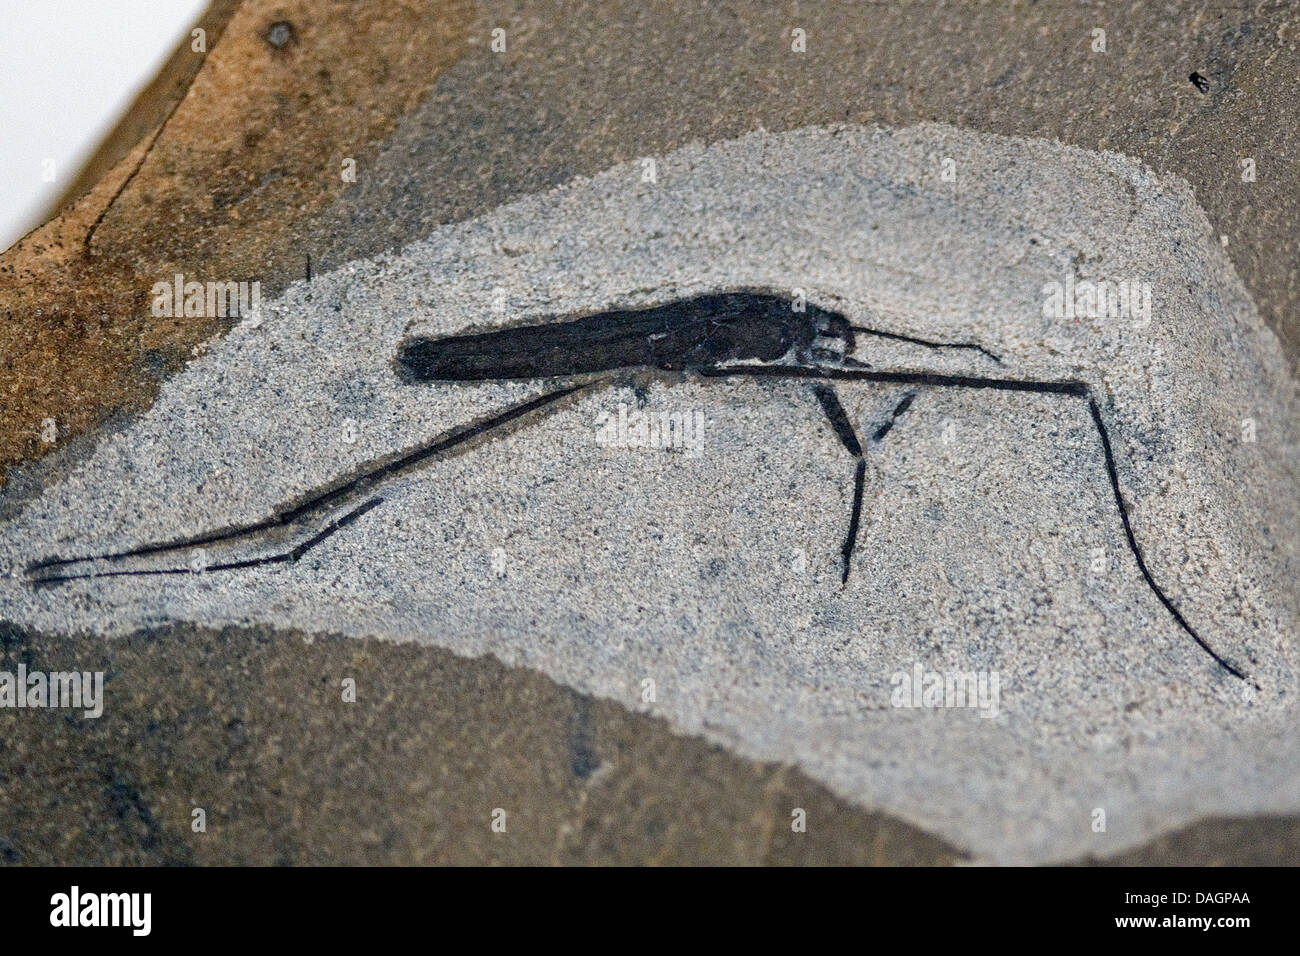 pond skaters, water striders, pond skippers (Gerridae, Gerris spec.), fossilized fish from Fur Formation, palaeocene/eocene, Denmark, Limfjord Stock Photo